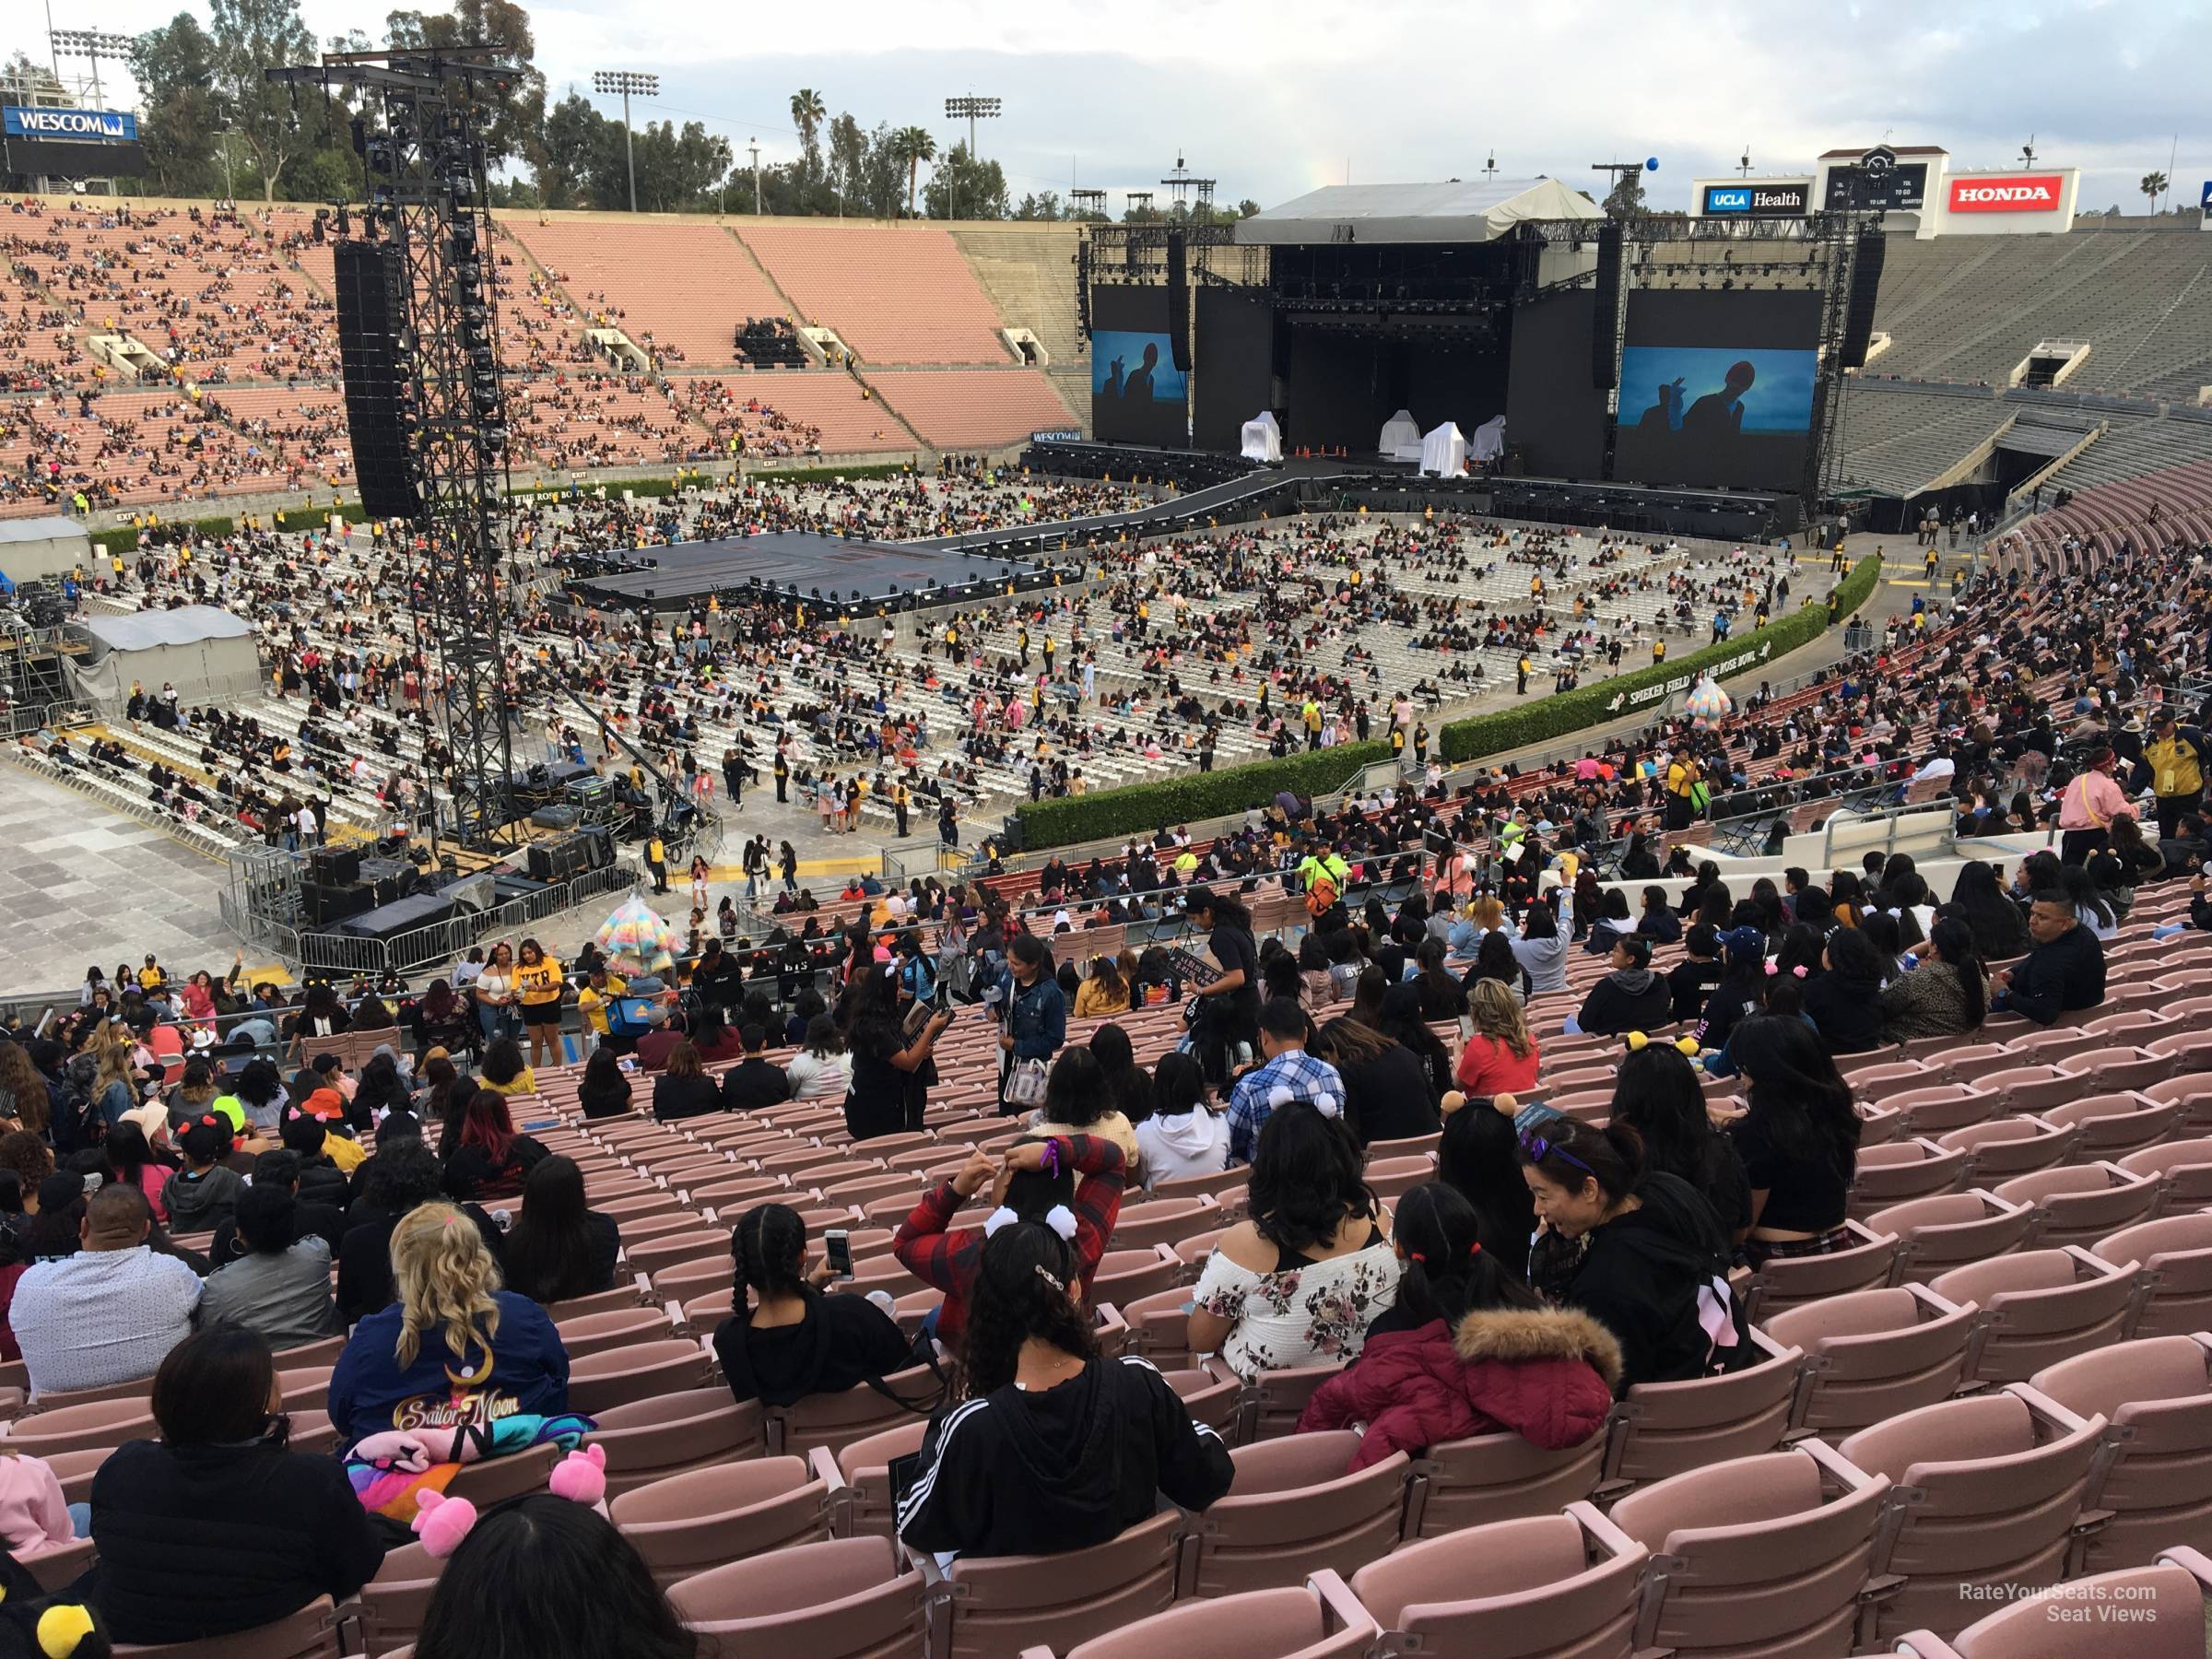 Section 16 at Rose Bowl Stadium for Concerts